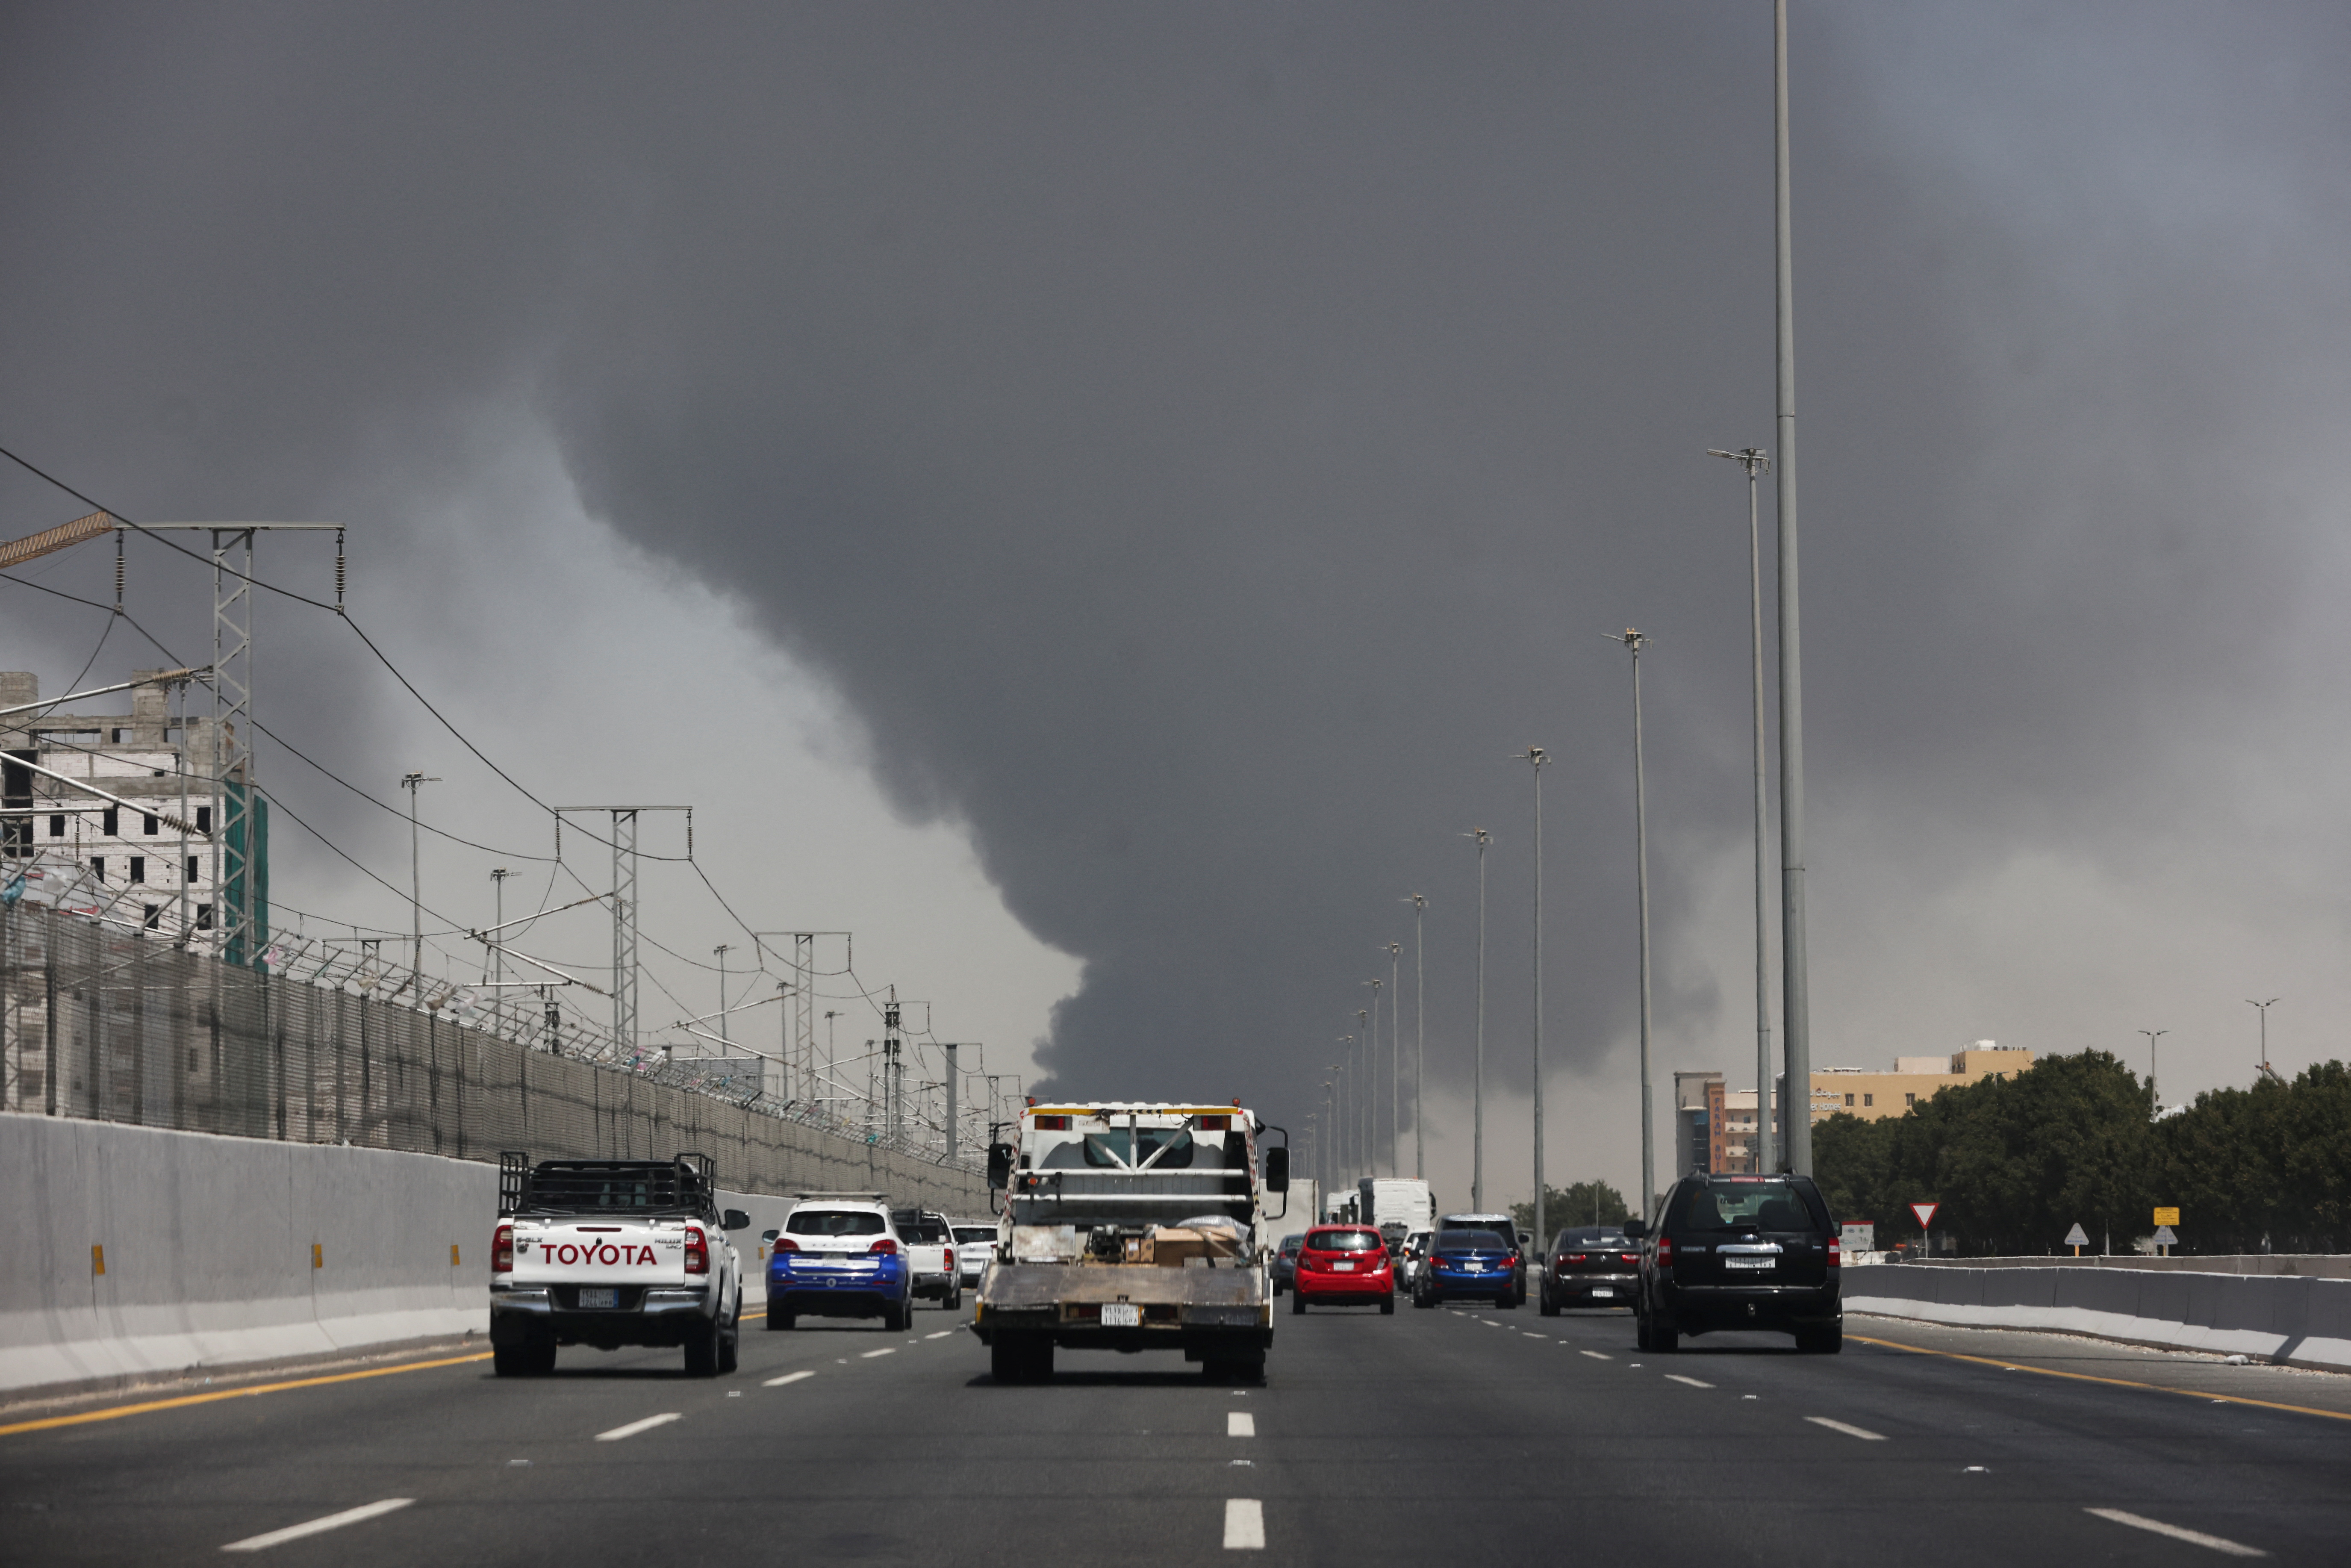 Smoke billows from a Saudi Aramco's petroleum storage facility after an attack in Jeddah